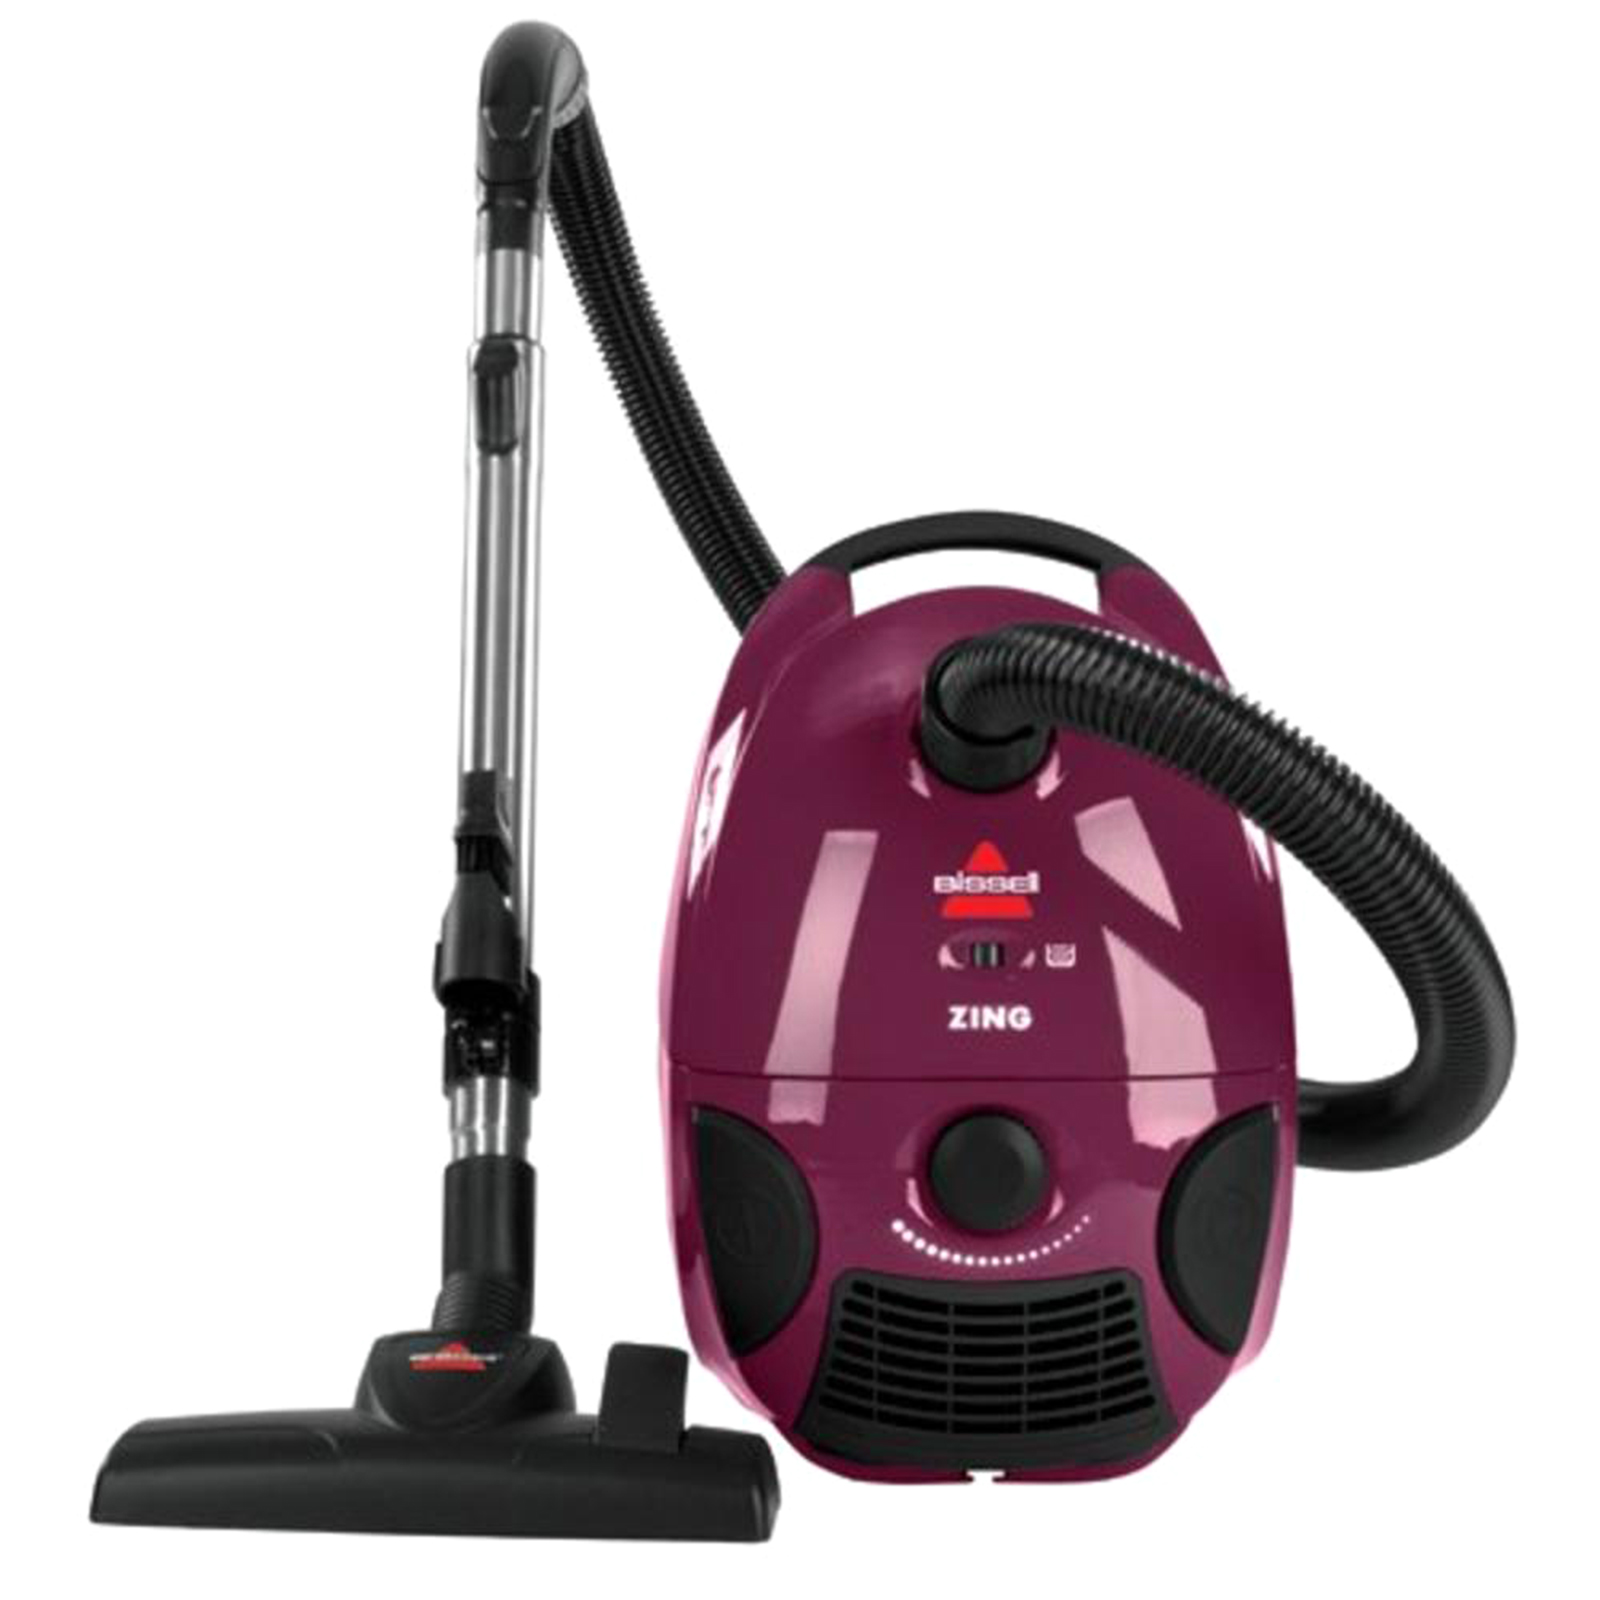 Bissell 4122 Zing Bagged Canister Vacuum - Purple